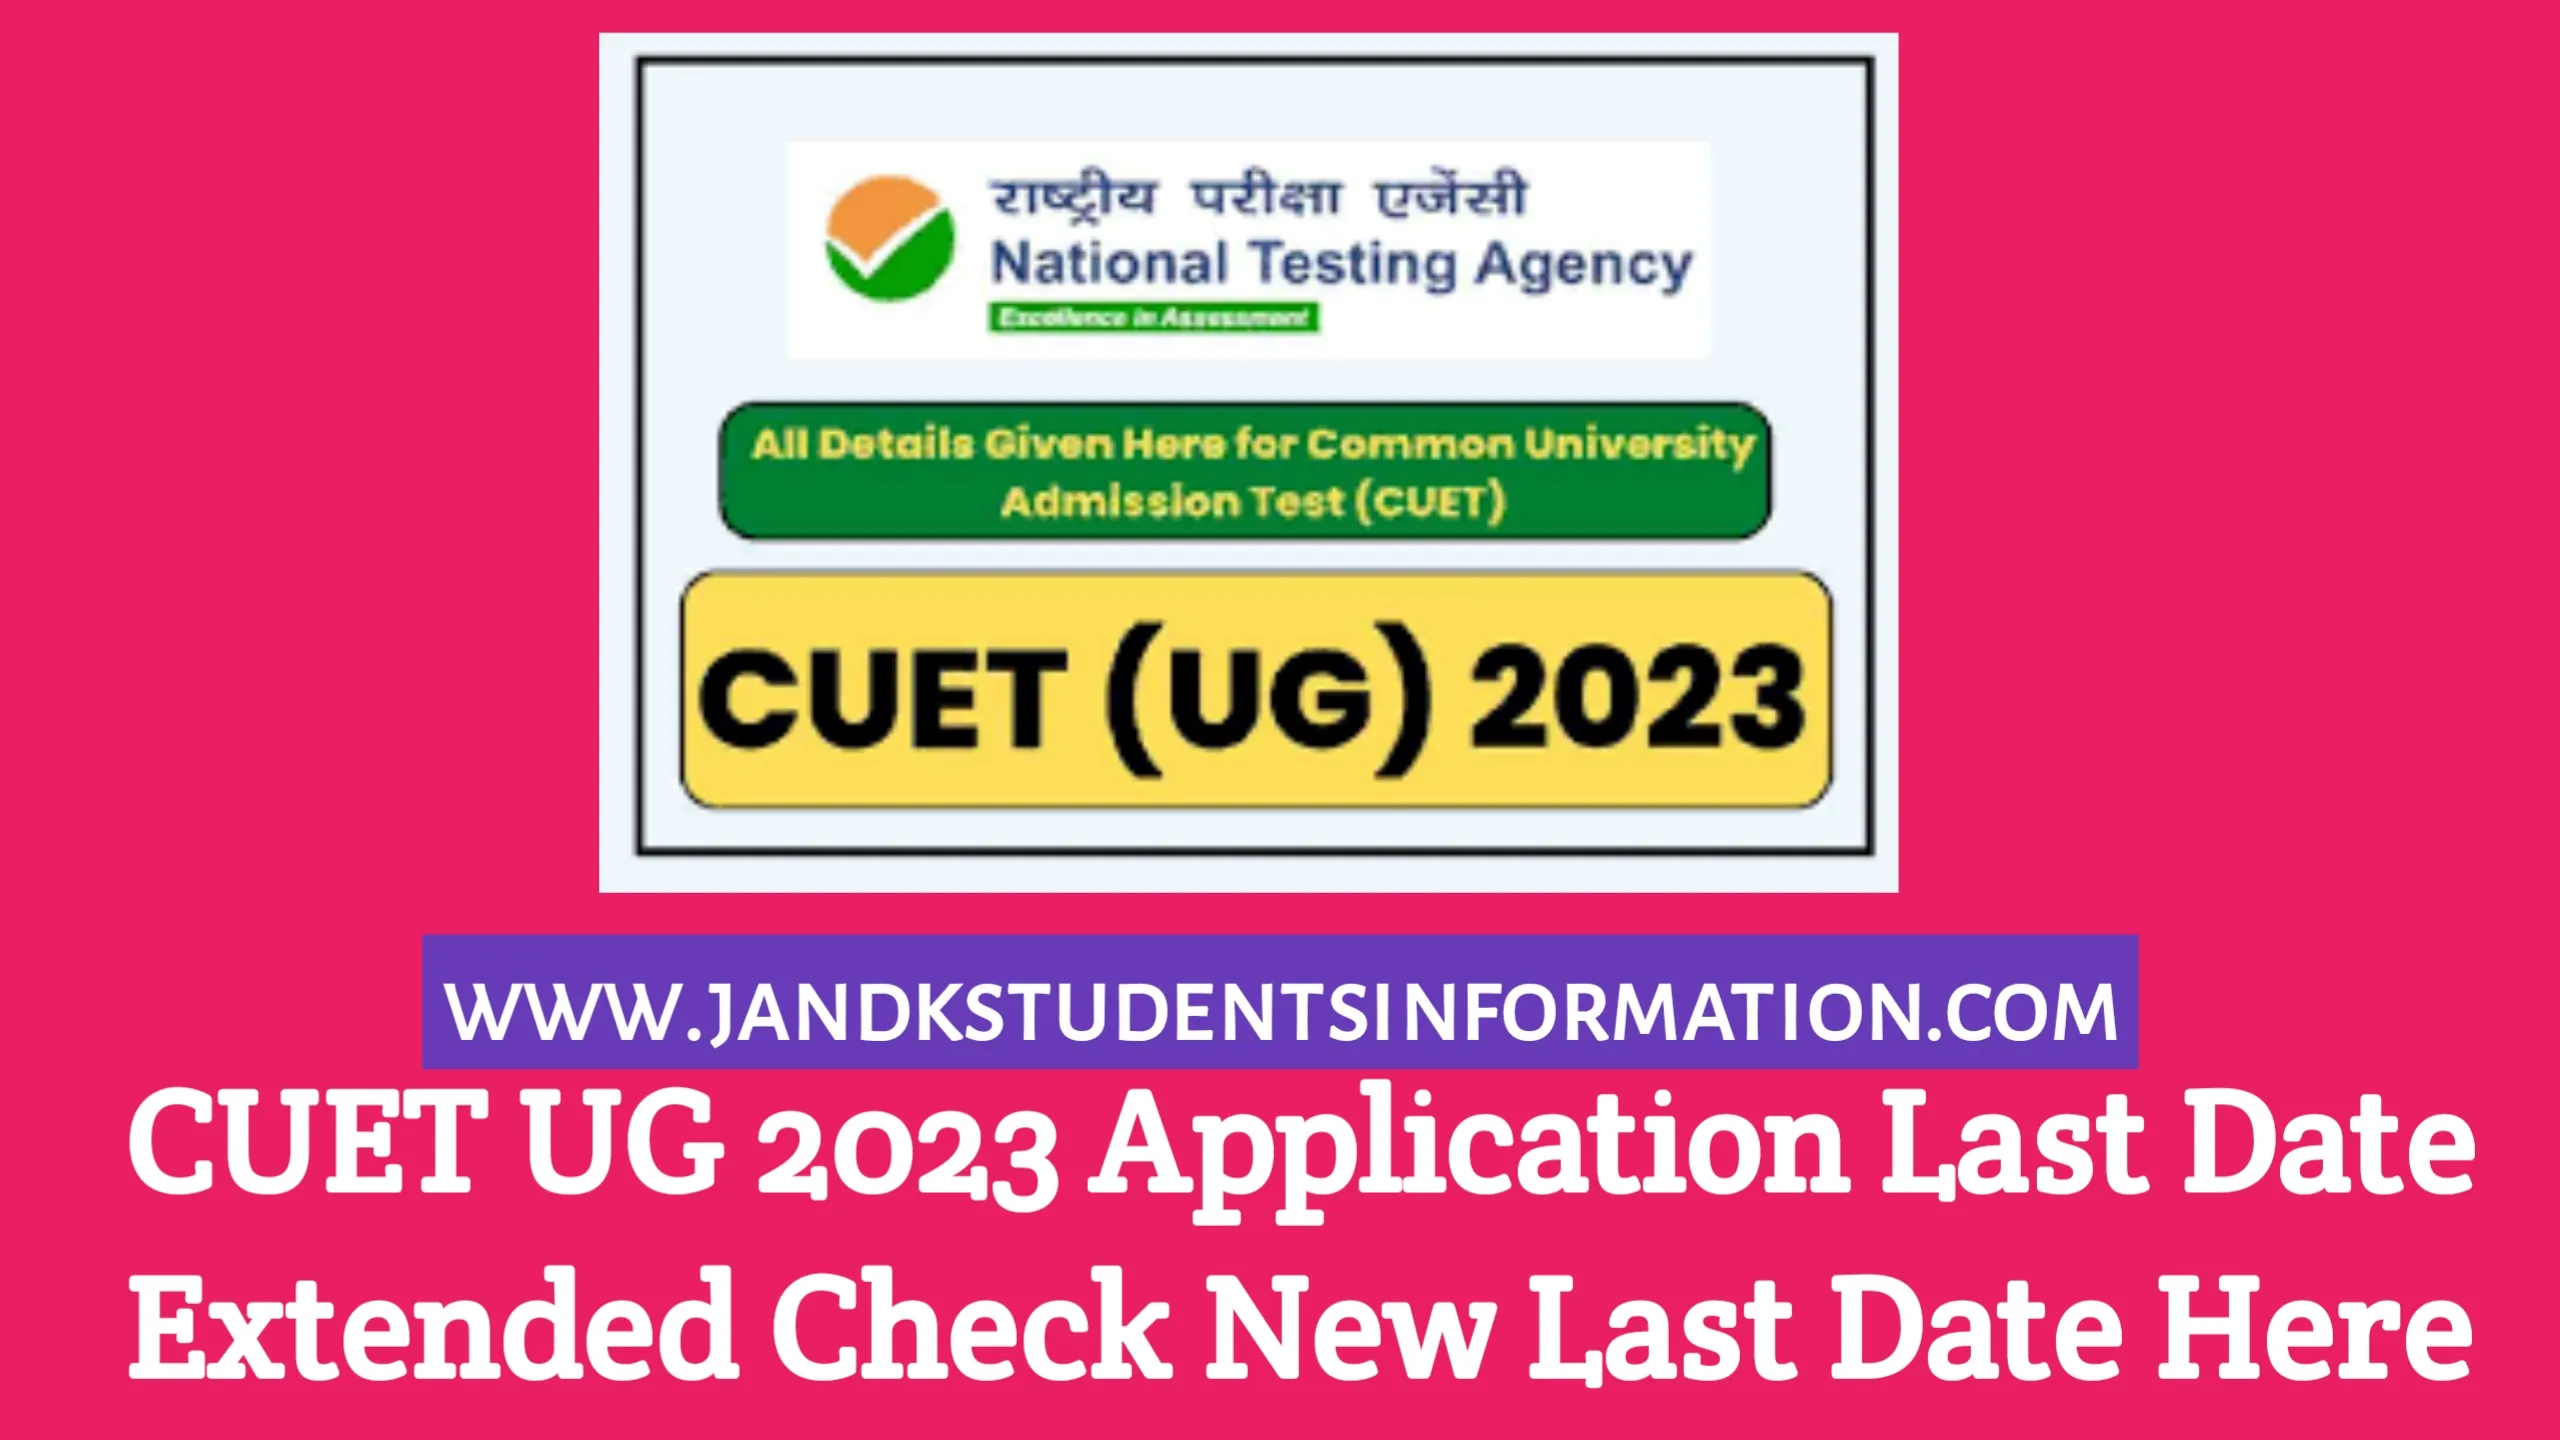 CUET UG 2023 Application Last Date Extended Check New Last Date Here